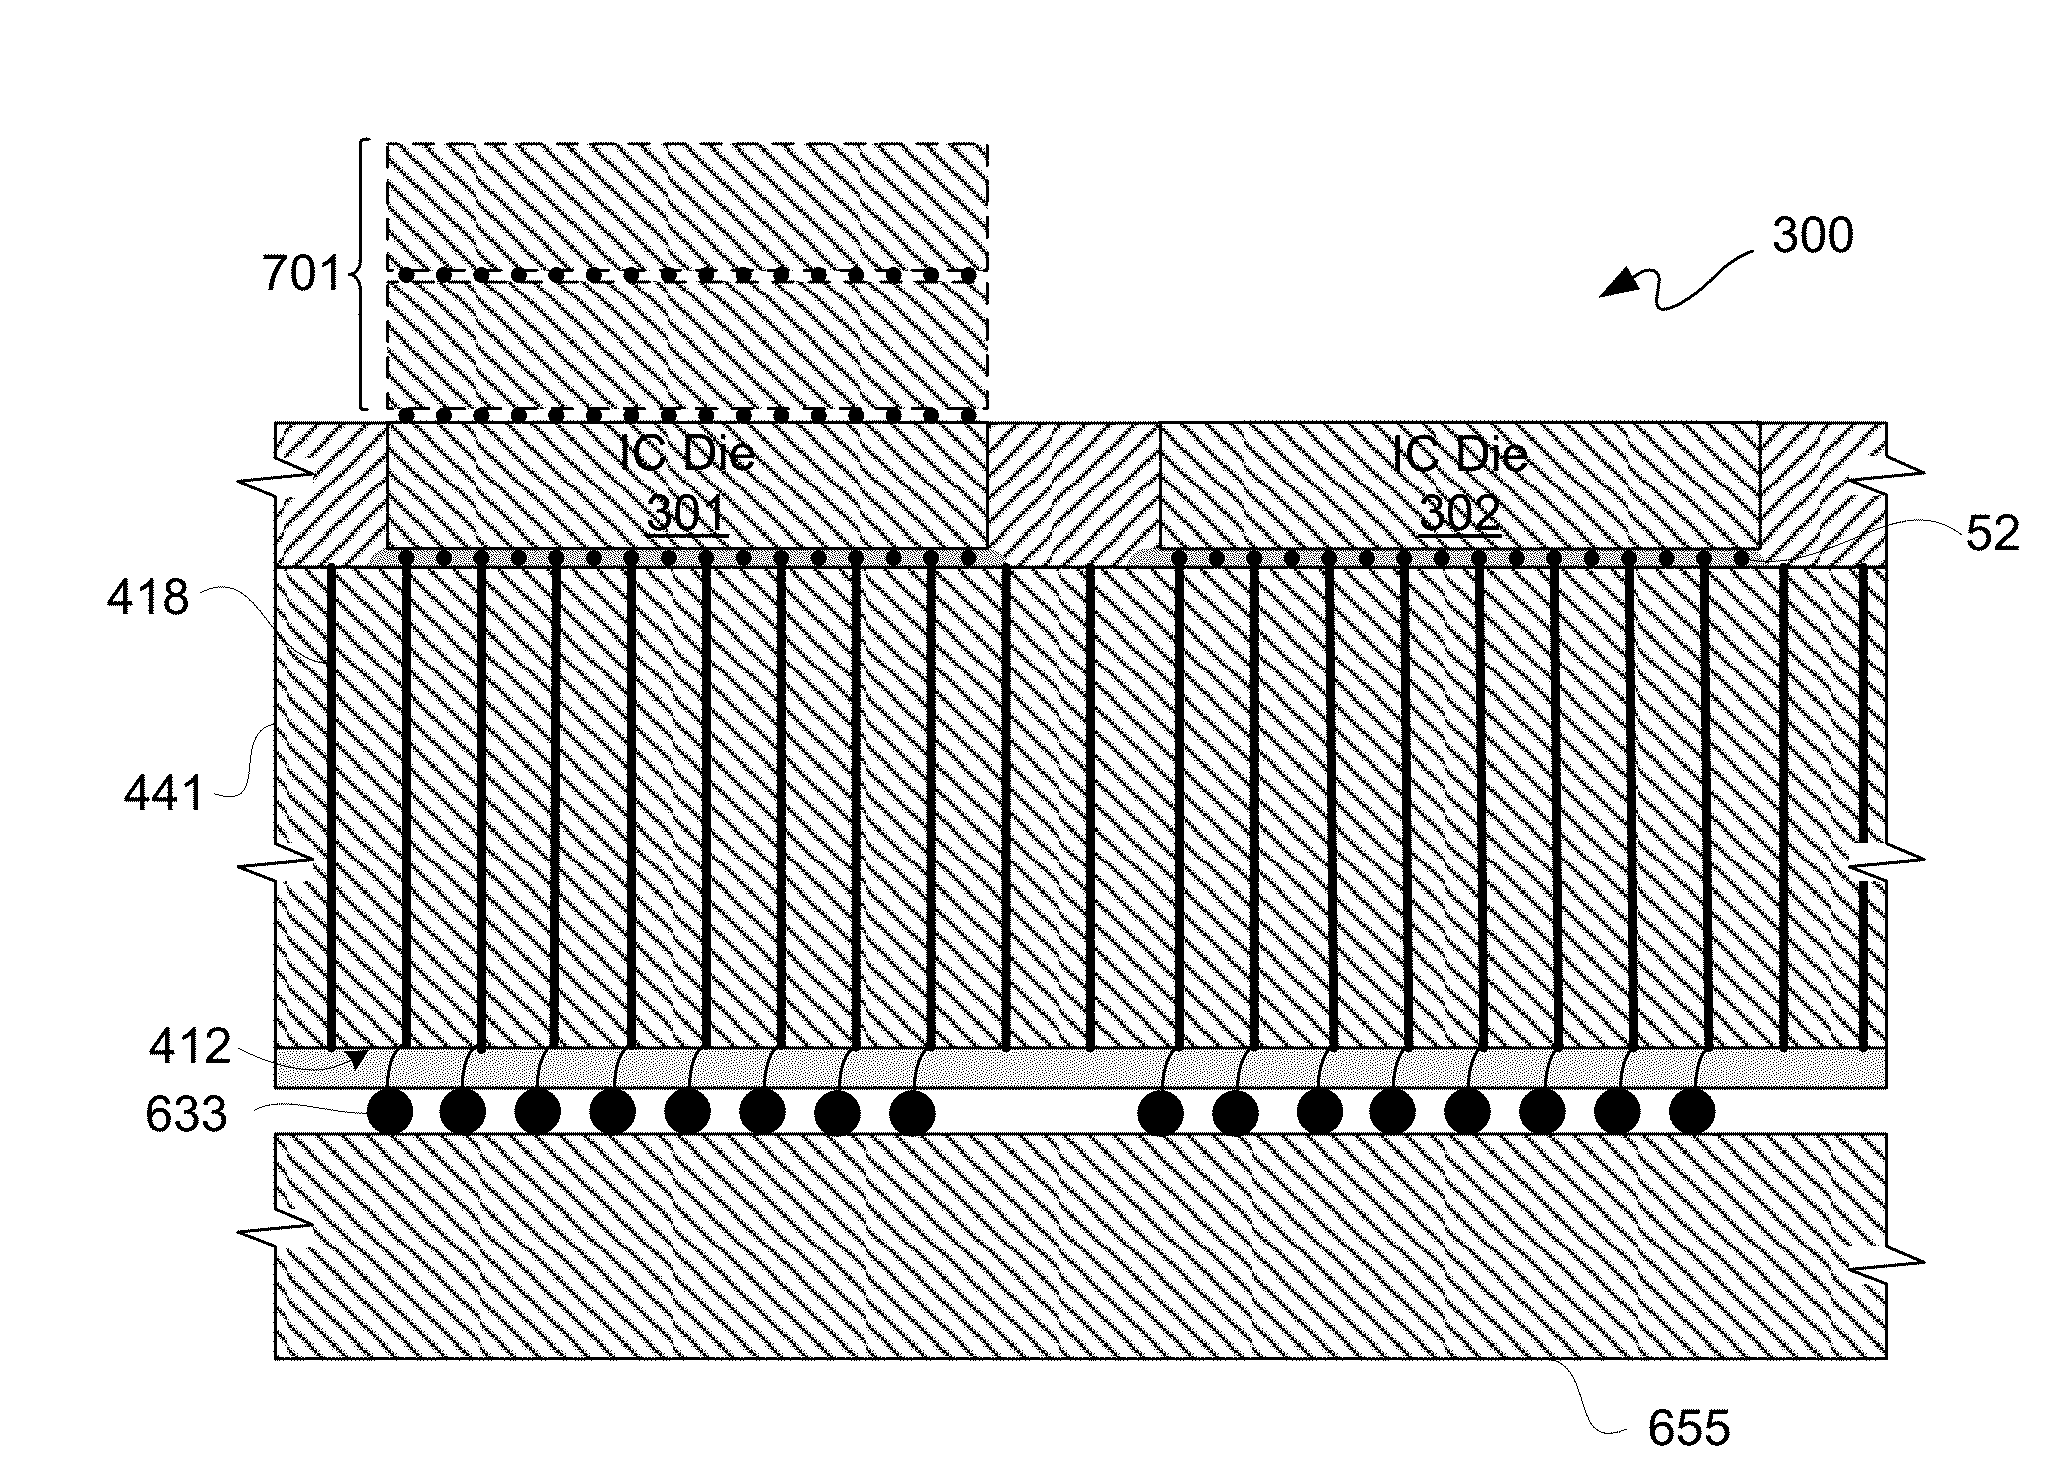 Stacked die integrated circuit